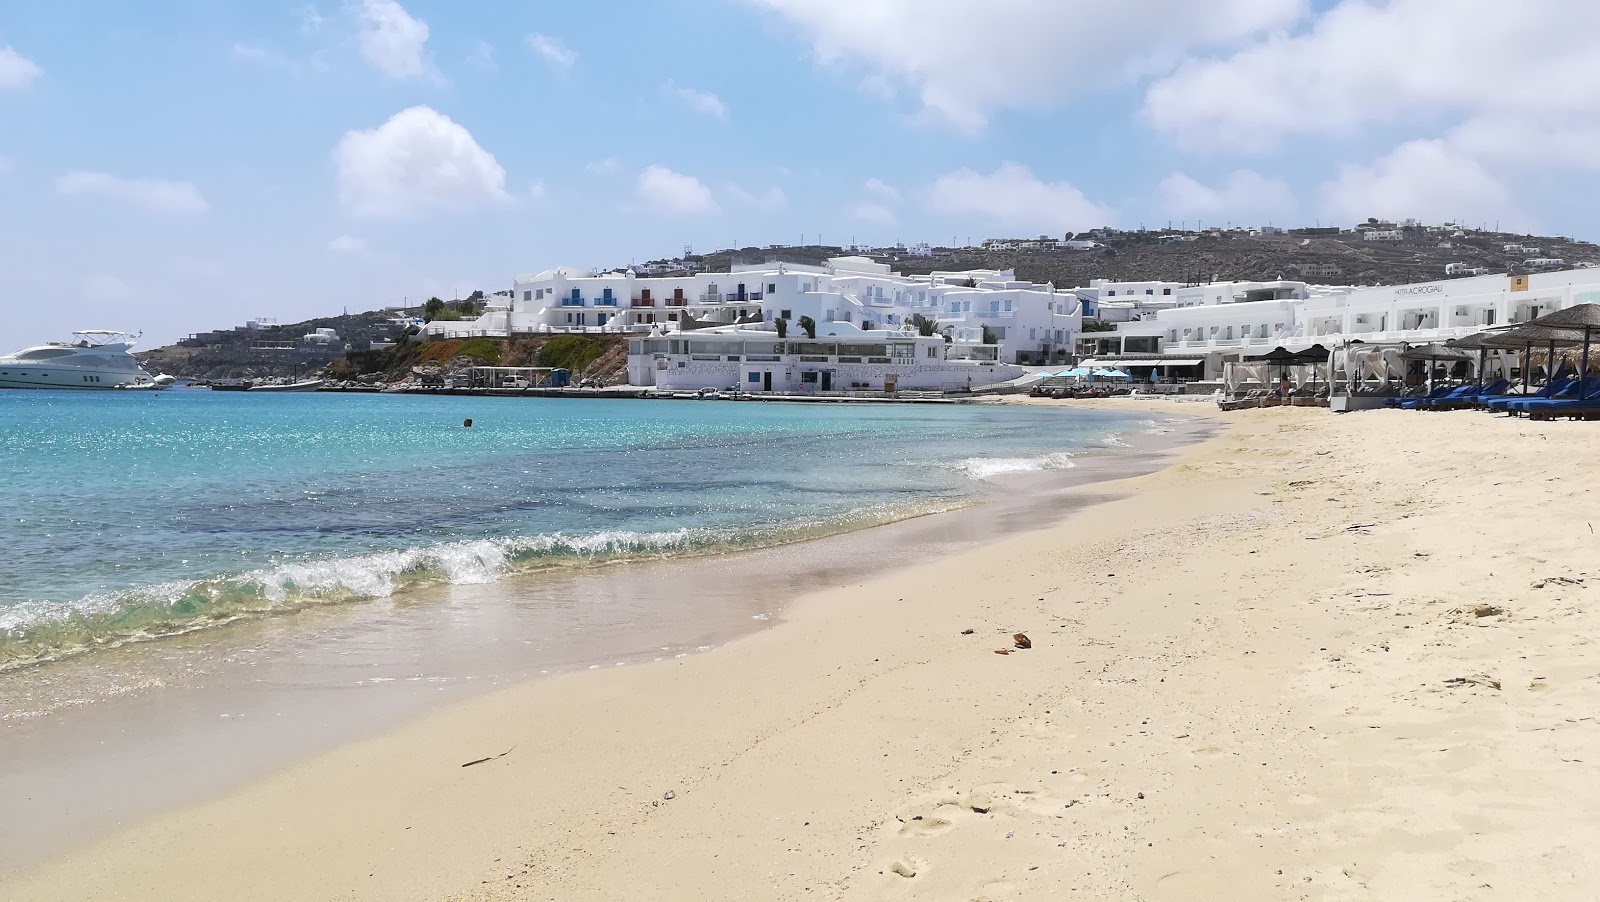 Photo of Platis Gialos beach and the settlement